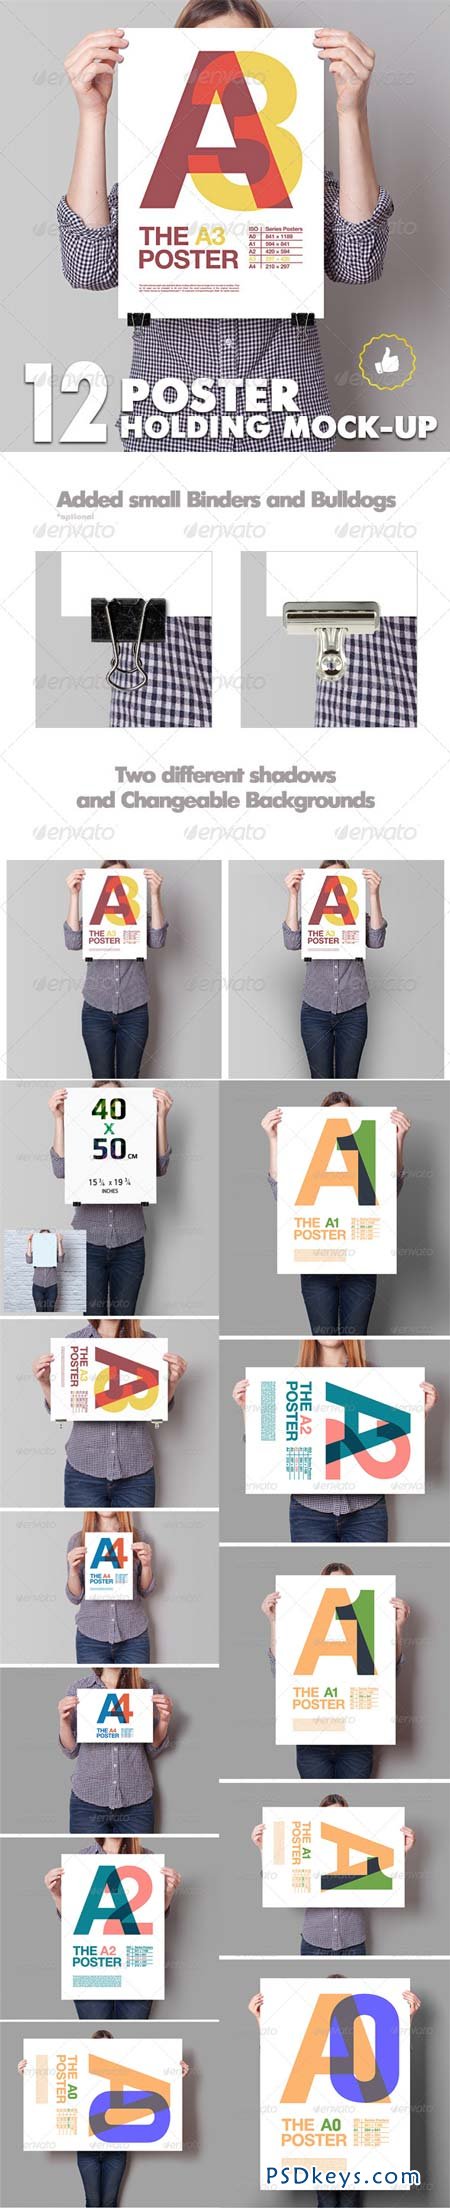 Poster Mockup 12 Different Images 5788286